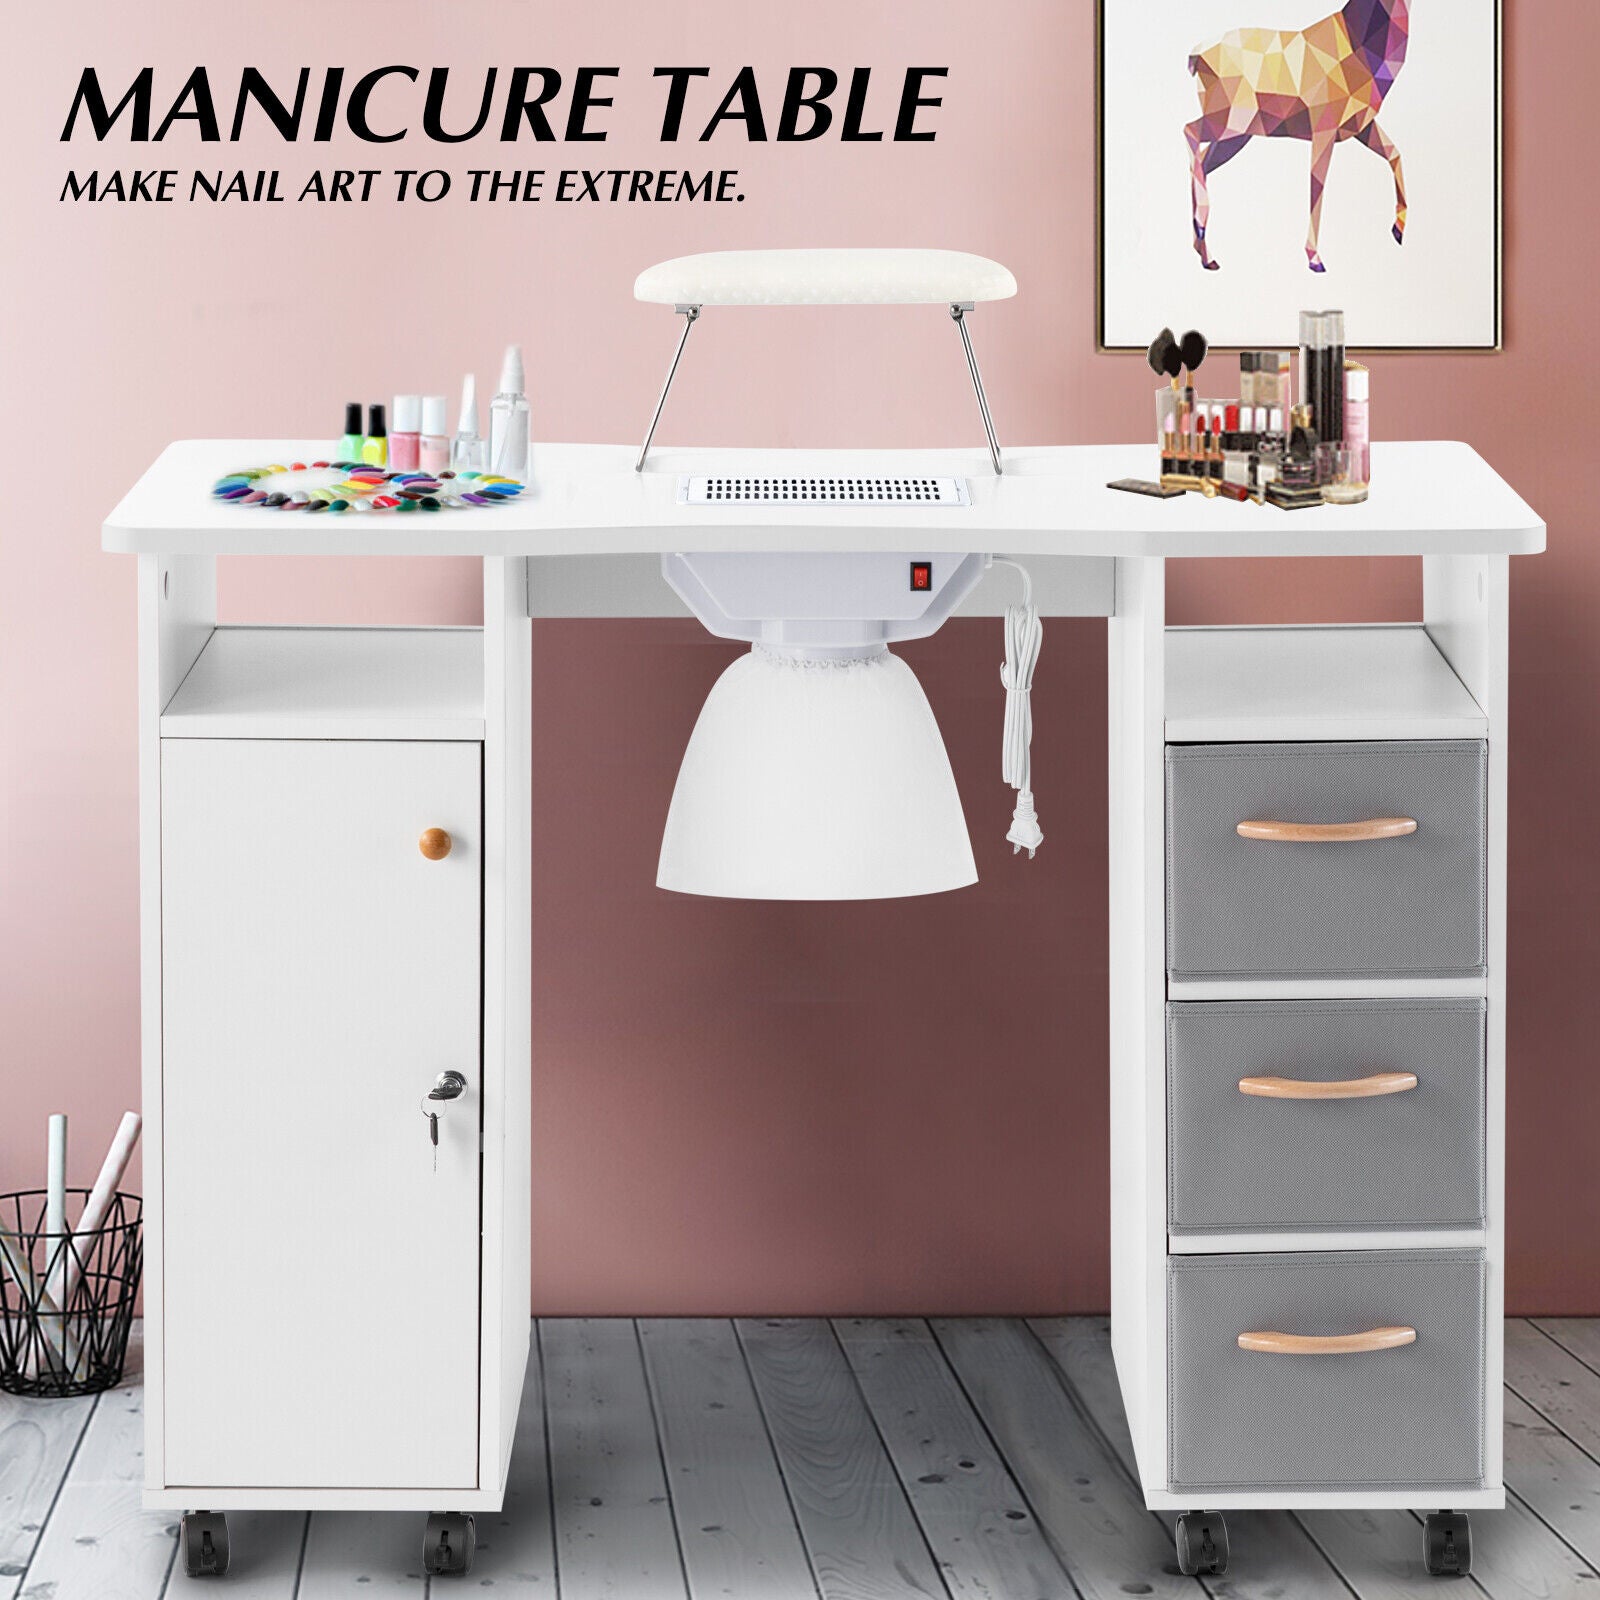 #7011 Manicure Table, Nail Tech Table Station with Electric Downdraft Vent, Wrist Cushion, Lockable Wheels, Storage Drawers, Wooden Handle